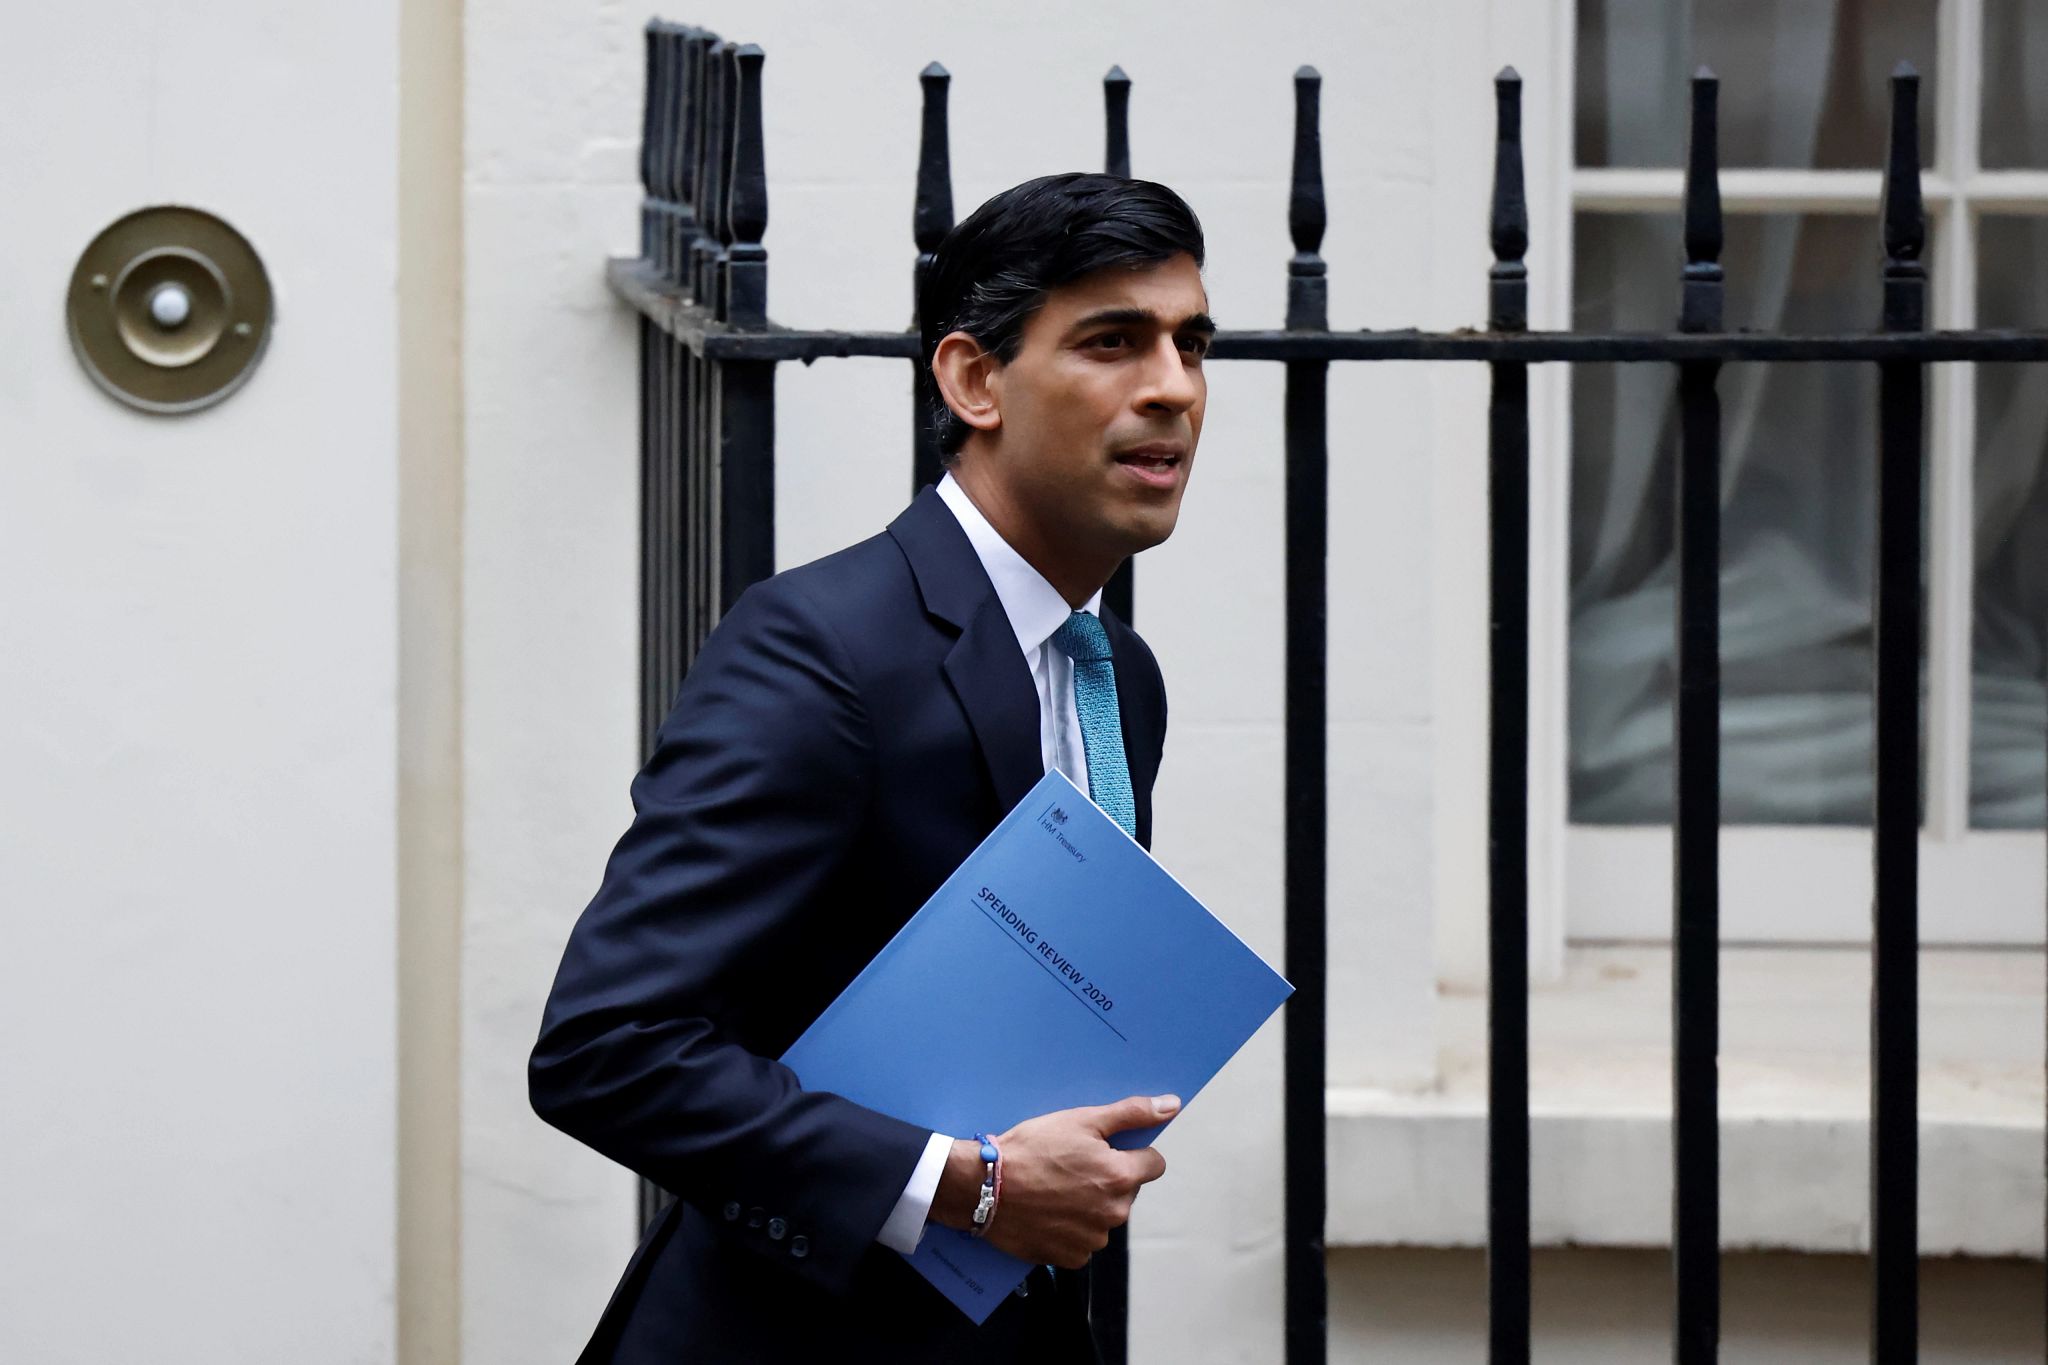 Britain's Chancellor of the Exchequer Rishi Sunak leaves 11 Downing Street in central London, on November 25, 2020, before heading to the House of Commons to present his economic spending review. - Britain's government, seeking to support the pandemic-ravaged economy and the nation's post-Brexit future, will on Wednesday unveil its eagerly-awaited spending plans. Finance minister Rishi Sunak will deliver his spending review to parliament, one week before England ends a month of restrictions aimed at cutting a second wave of infections. (Photo by Tolga Akmen / AFP) (Photo by TOLGA AKMEN/AFP via Getty Images), ; Portrait of a U.K government official person. (Getty Images)